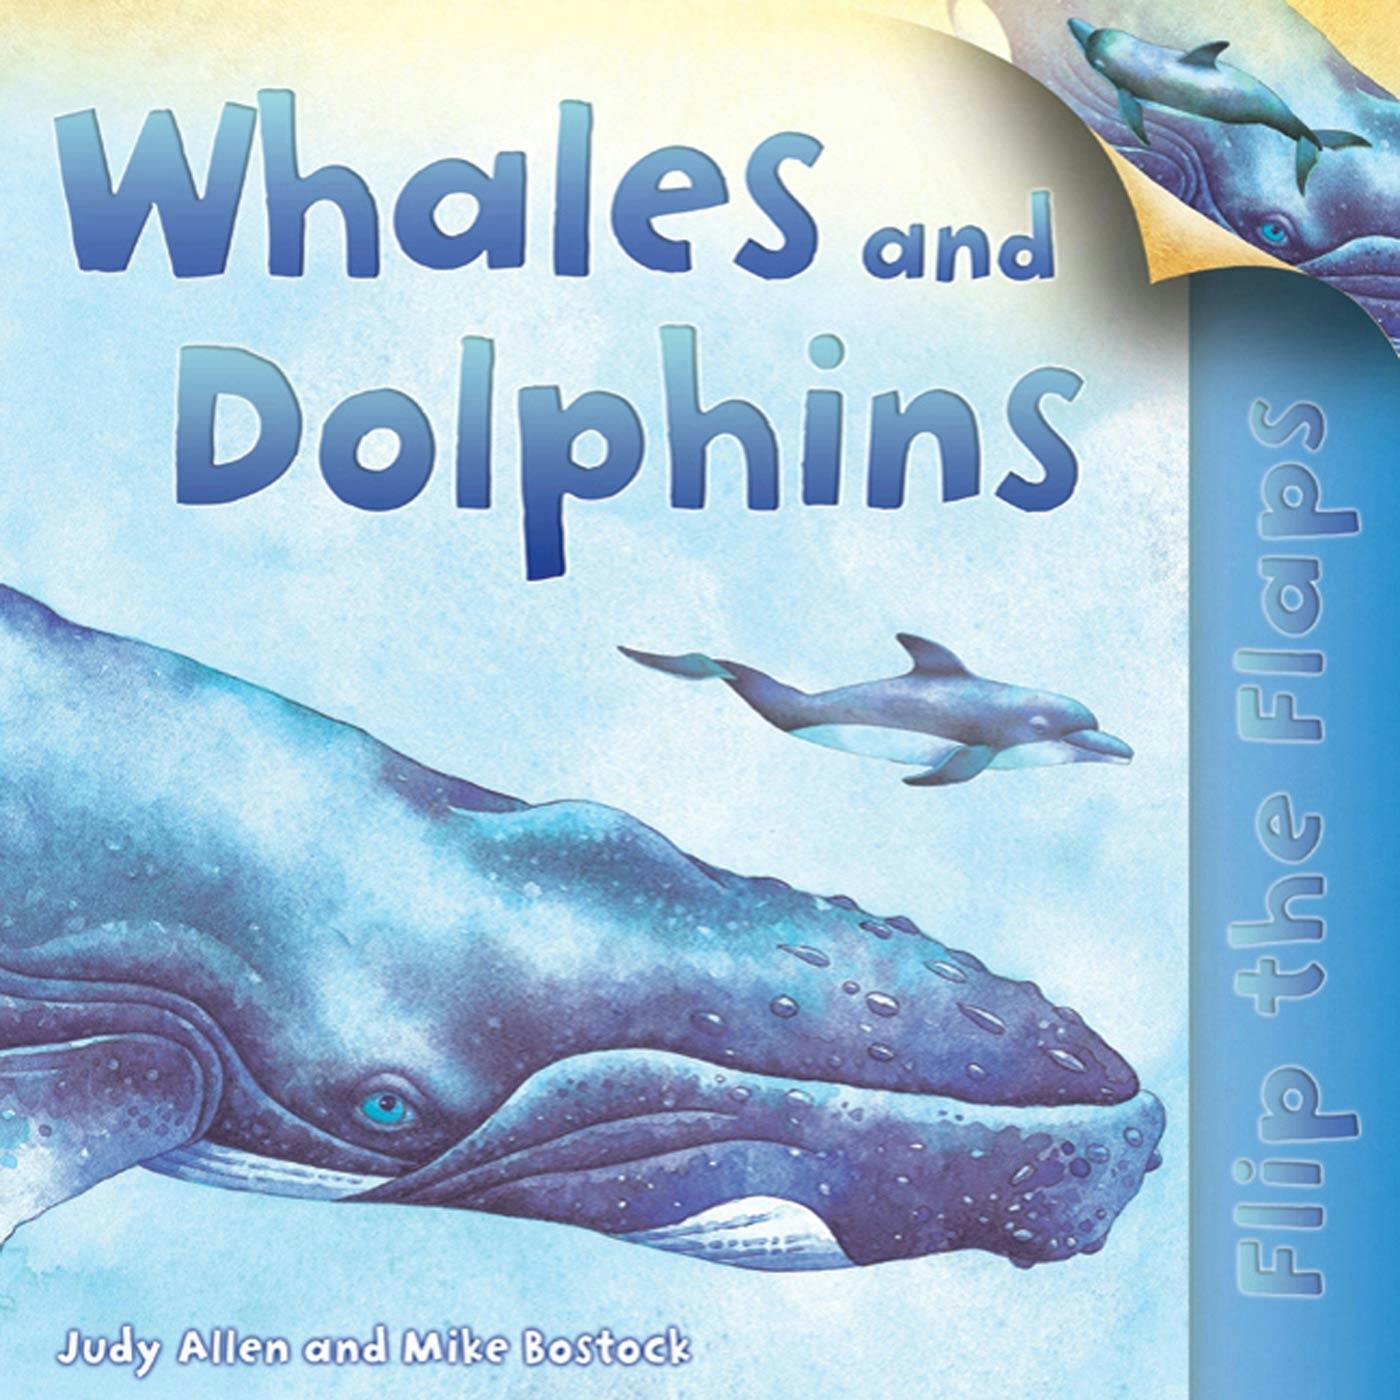 Flip The Flaps: Whales and Dolphins